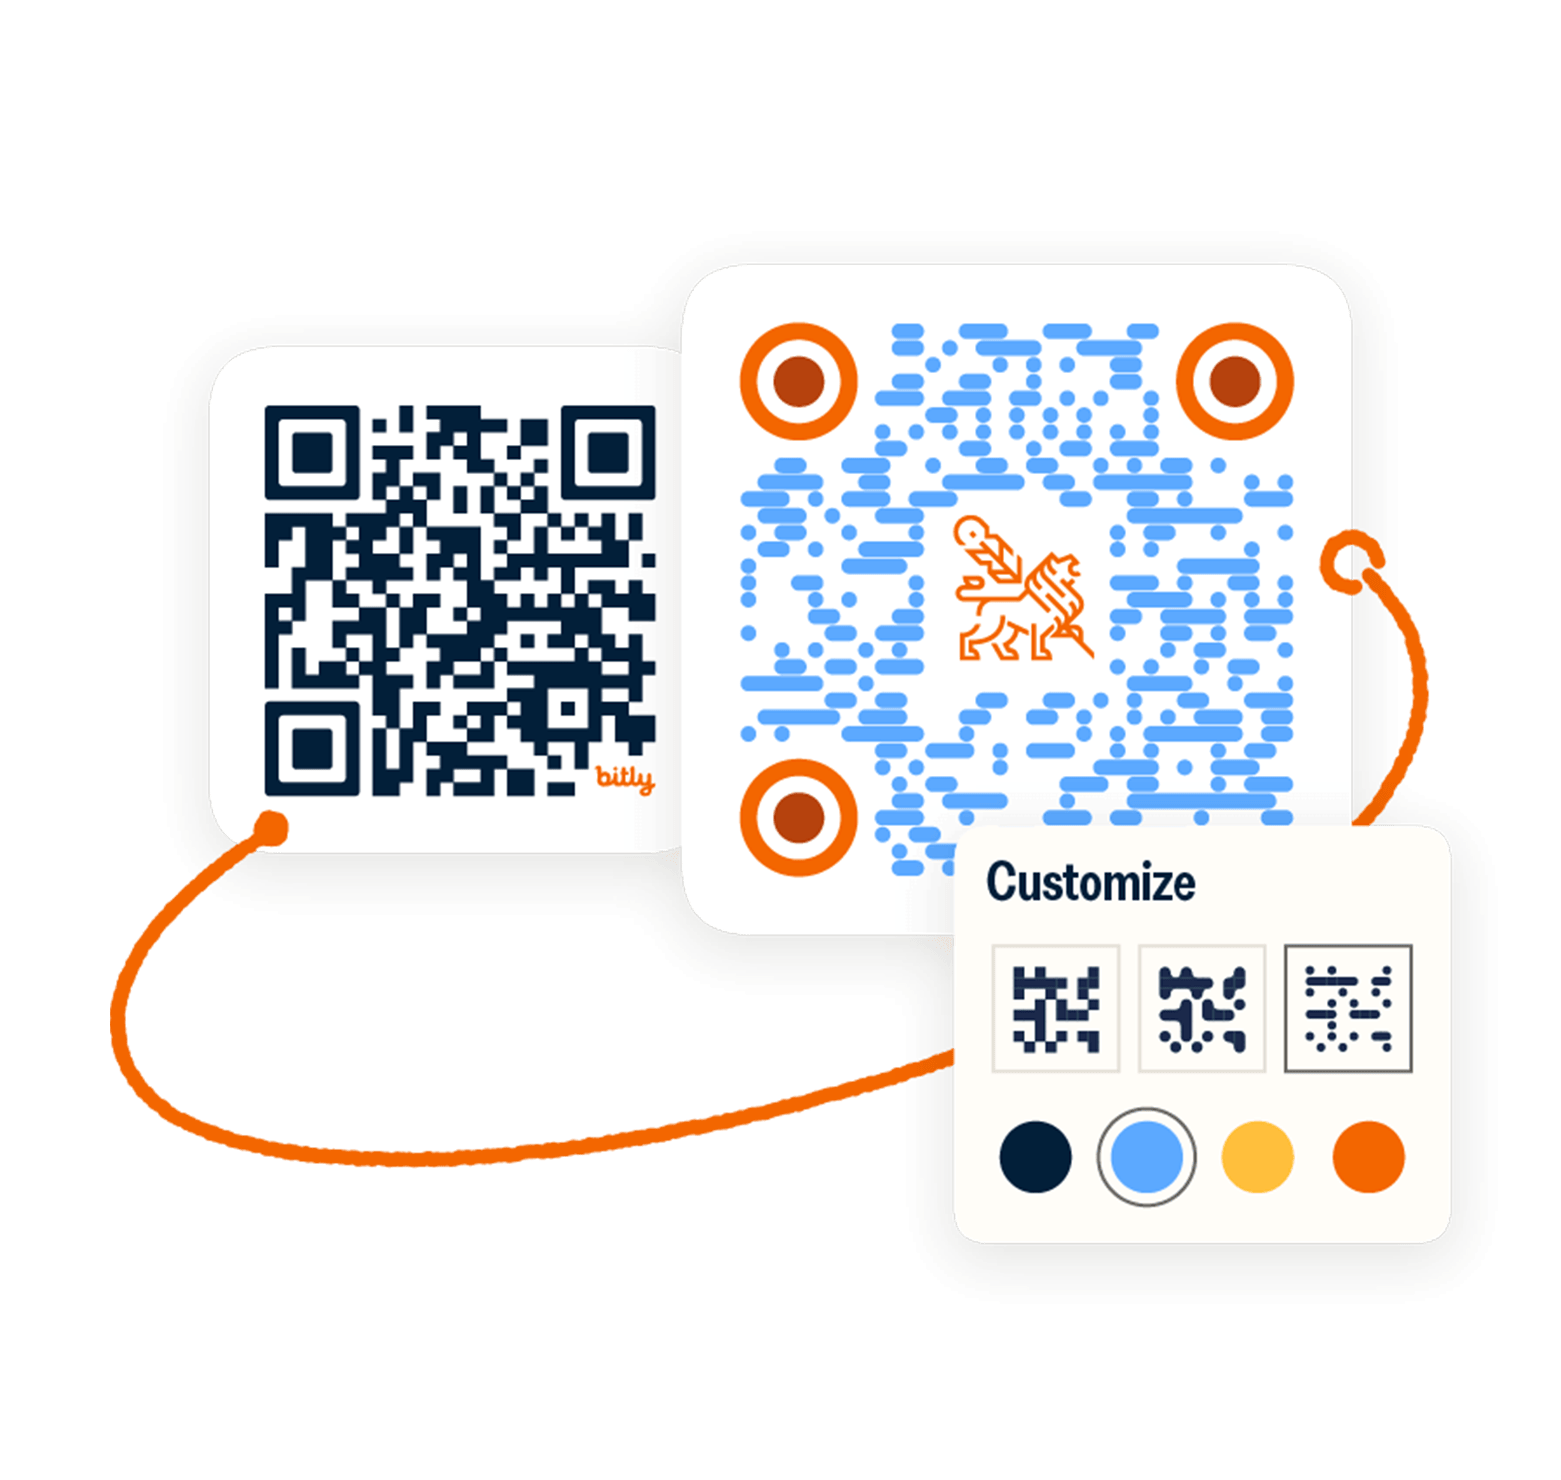 QR code options and sample of colors available